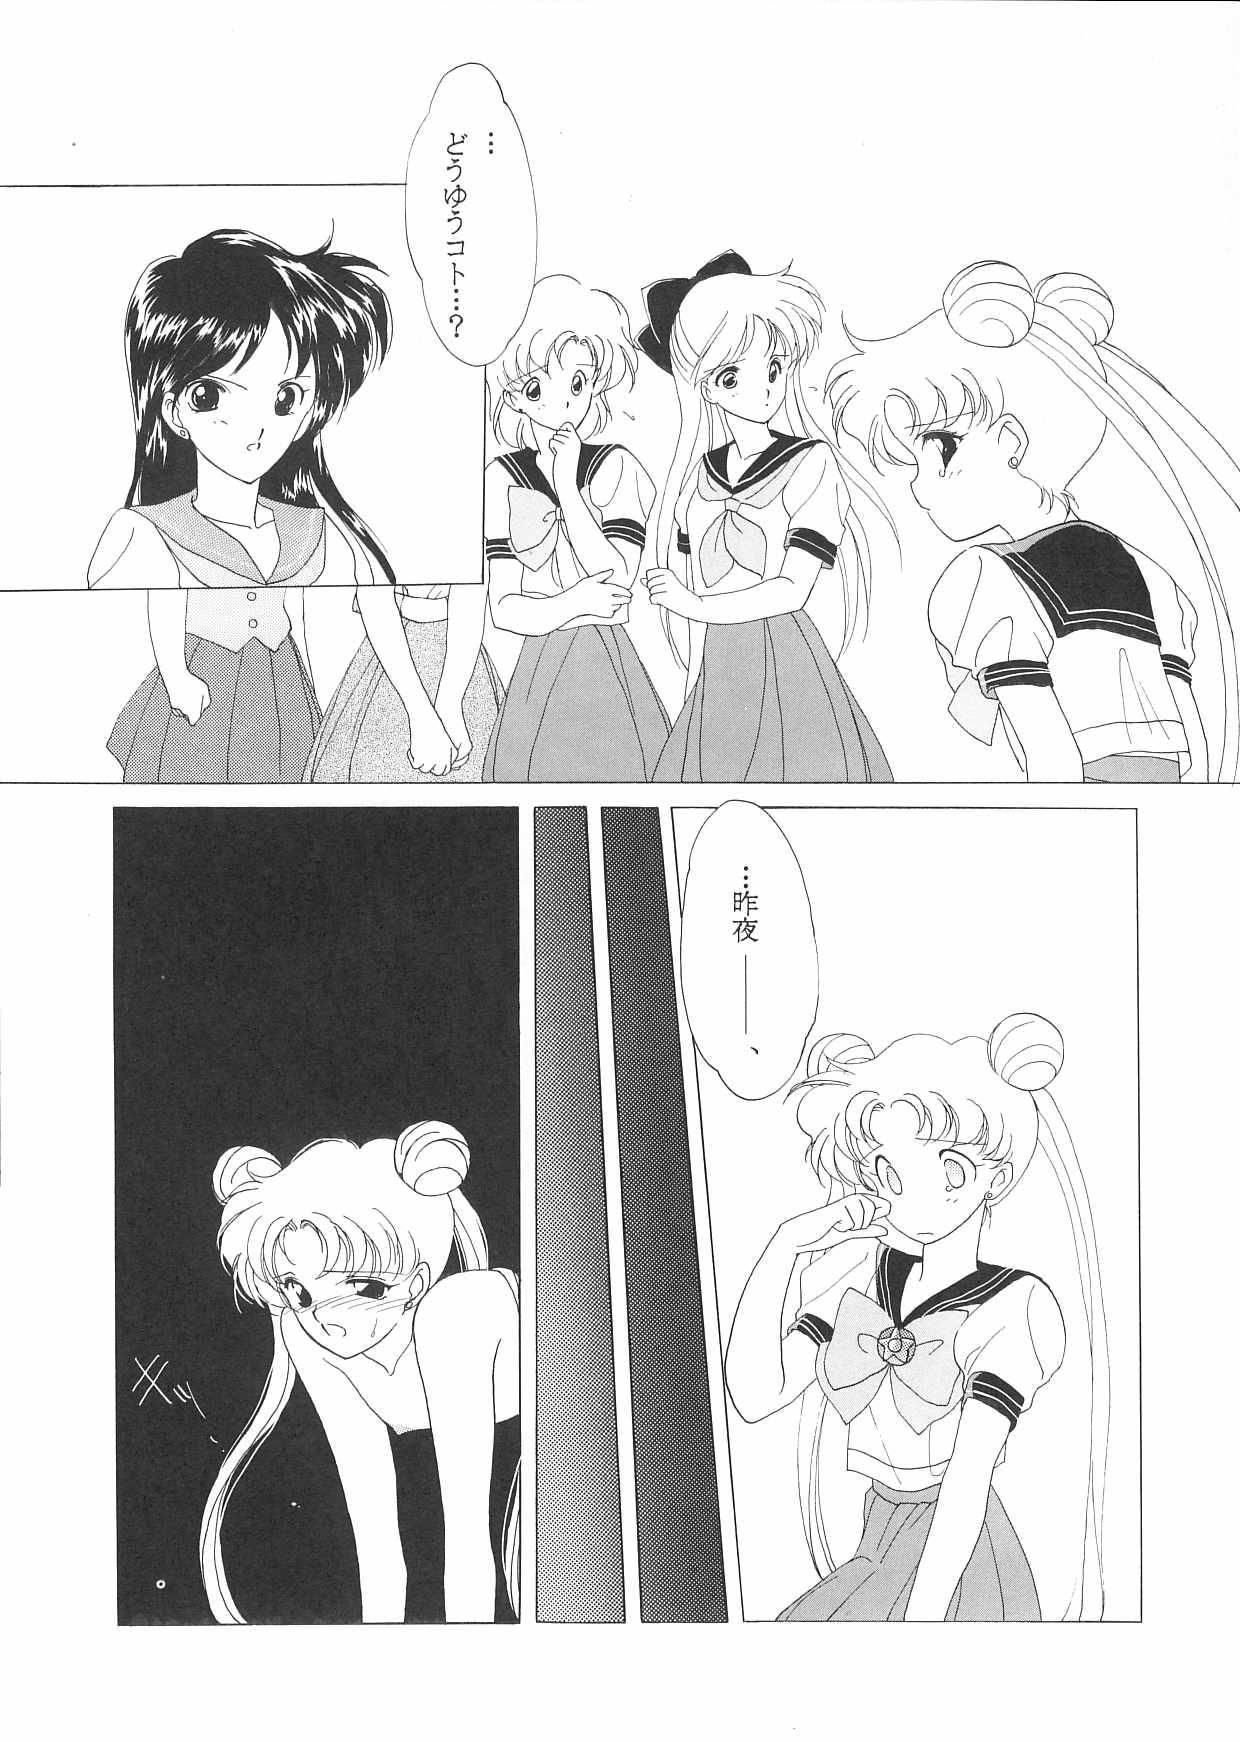 Screaming Pretty Soldier Sailor Moon F - Sailor moon Sucking Cocks - Page 5